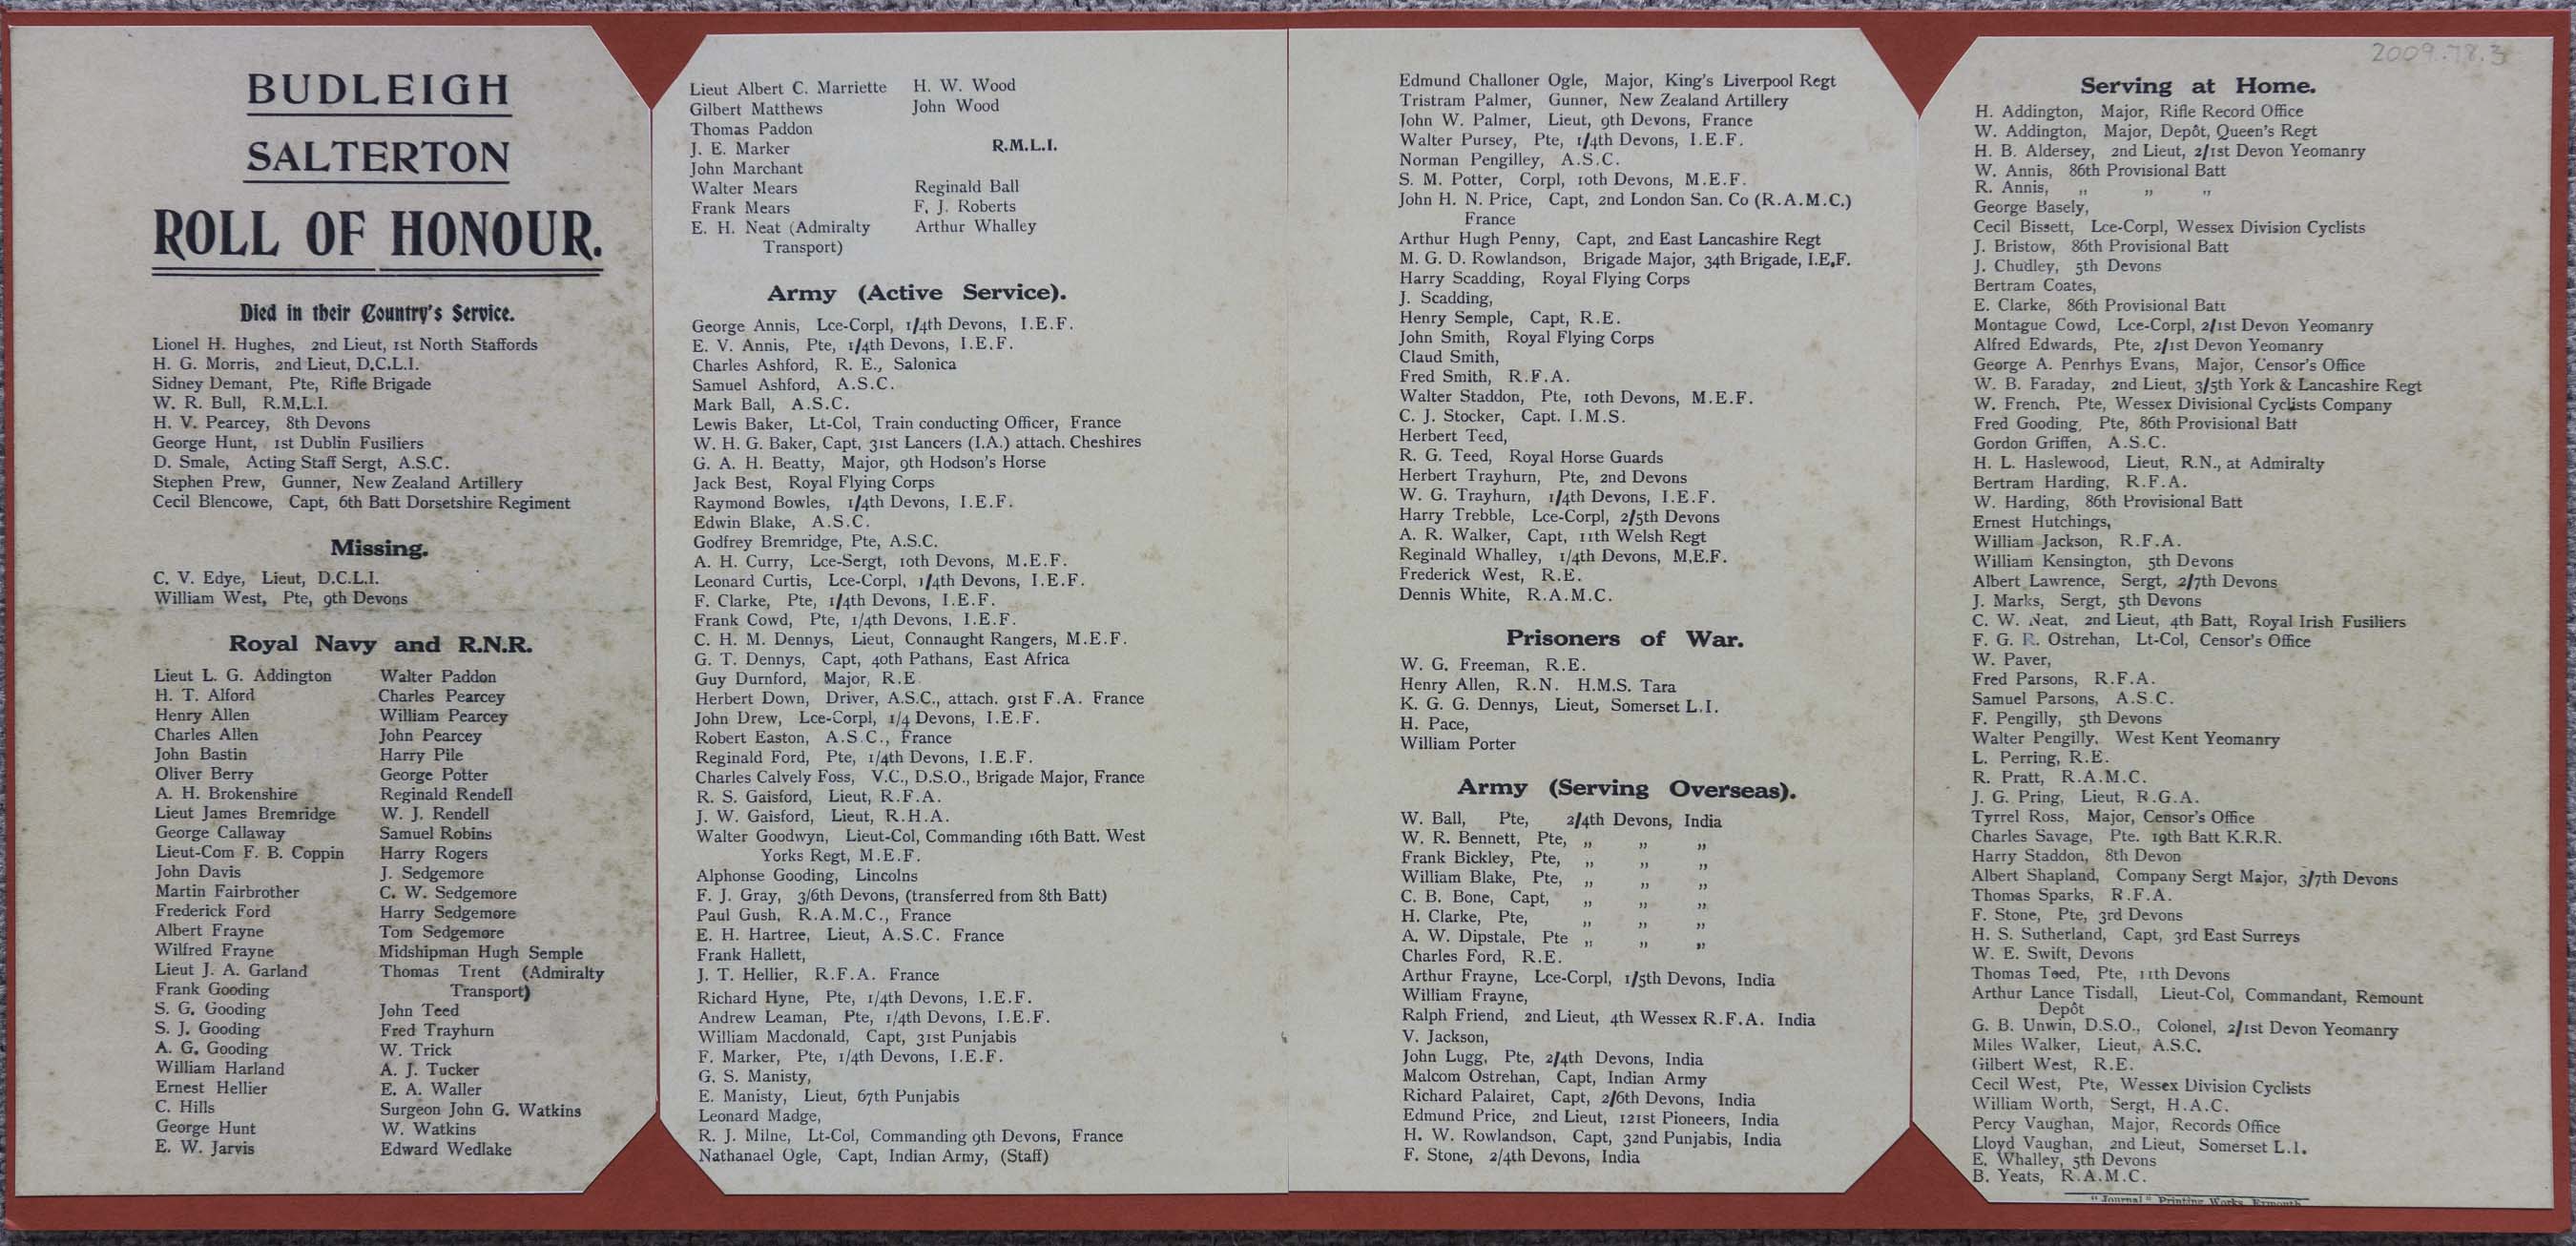 Budleigh Salterton's Roll of Honour